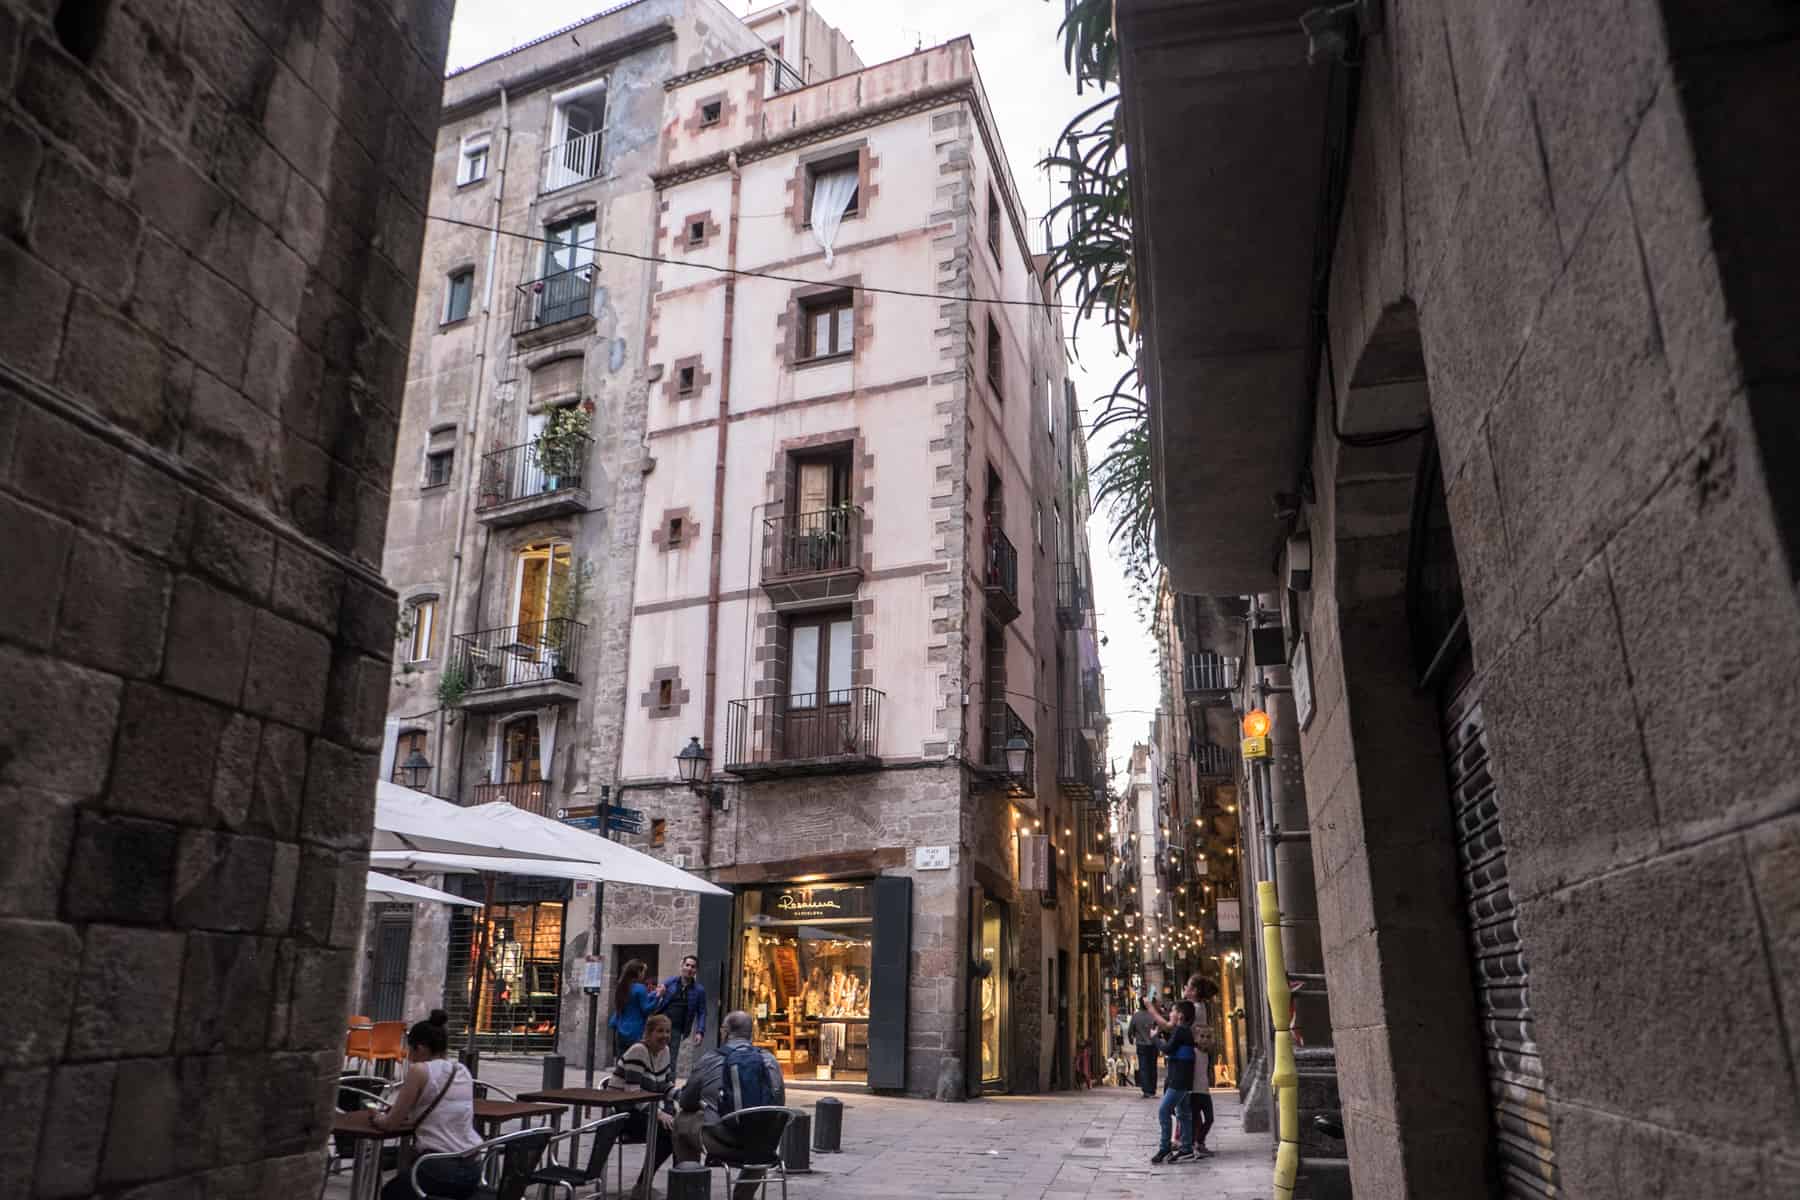 View from a street, looking into a small square that connects to other alleyways in Barcelona. People are sitting in the square at tables under umbrellas. 